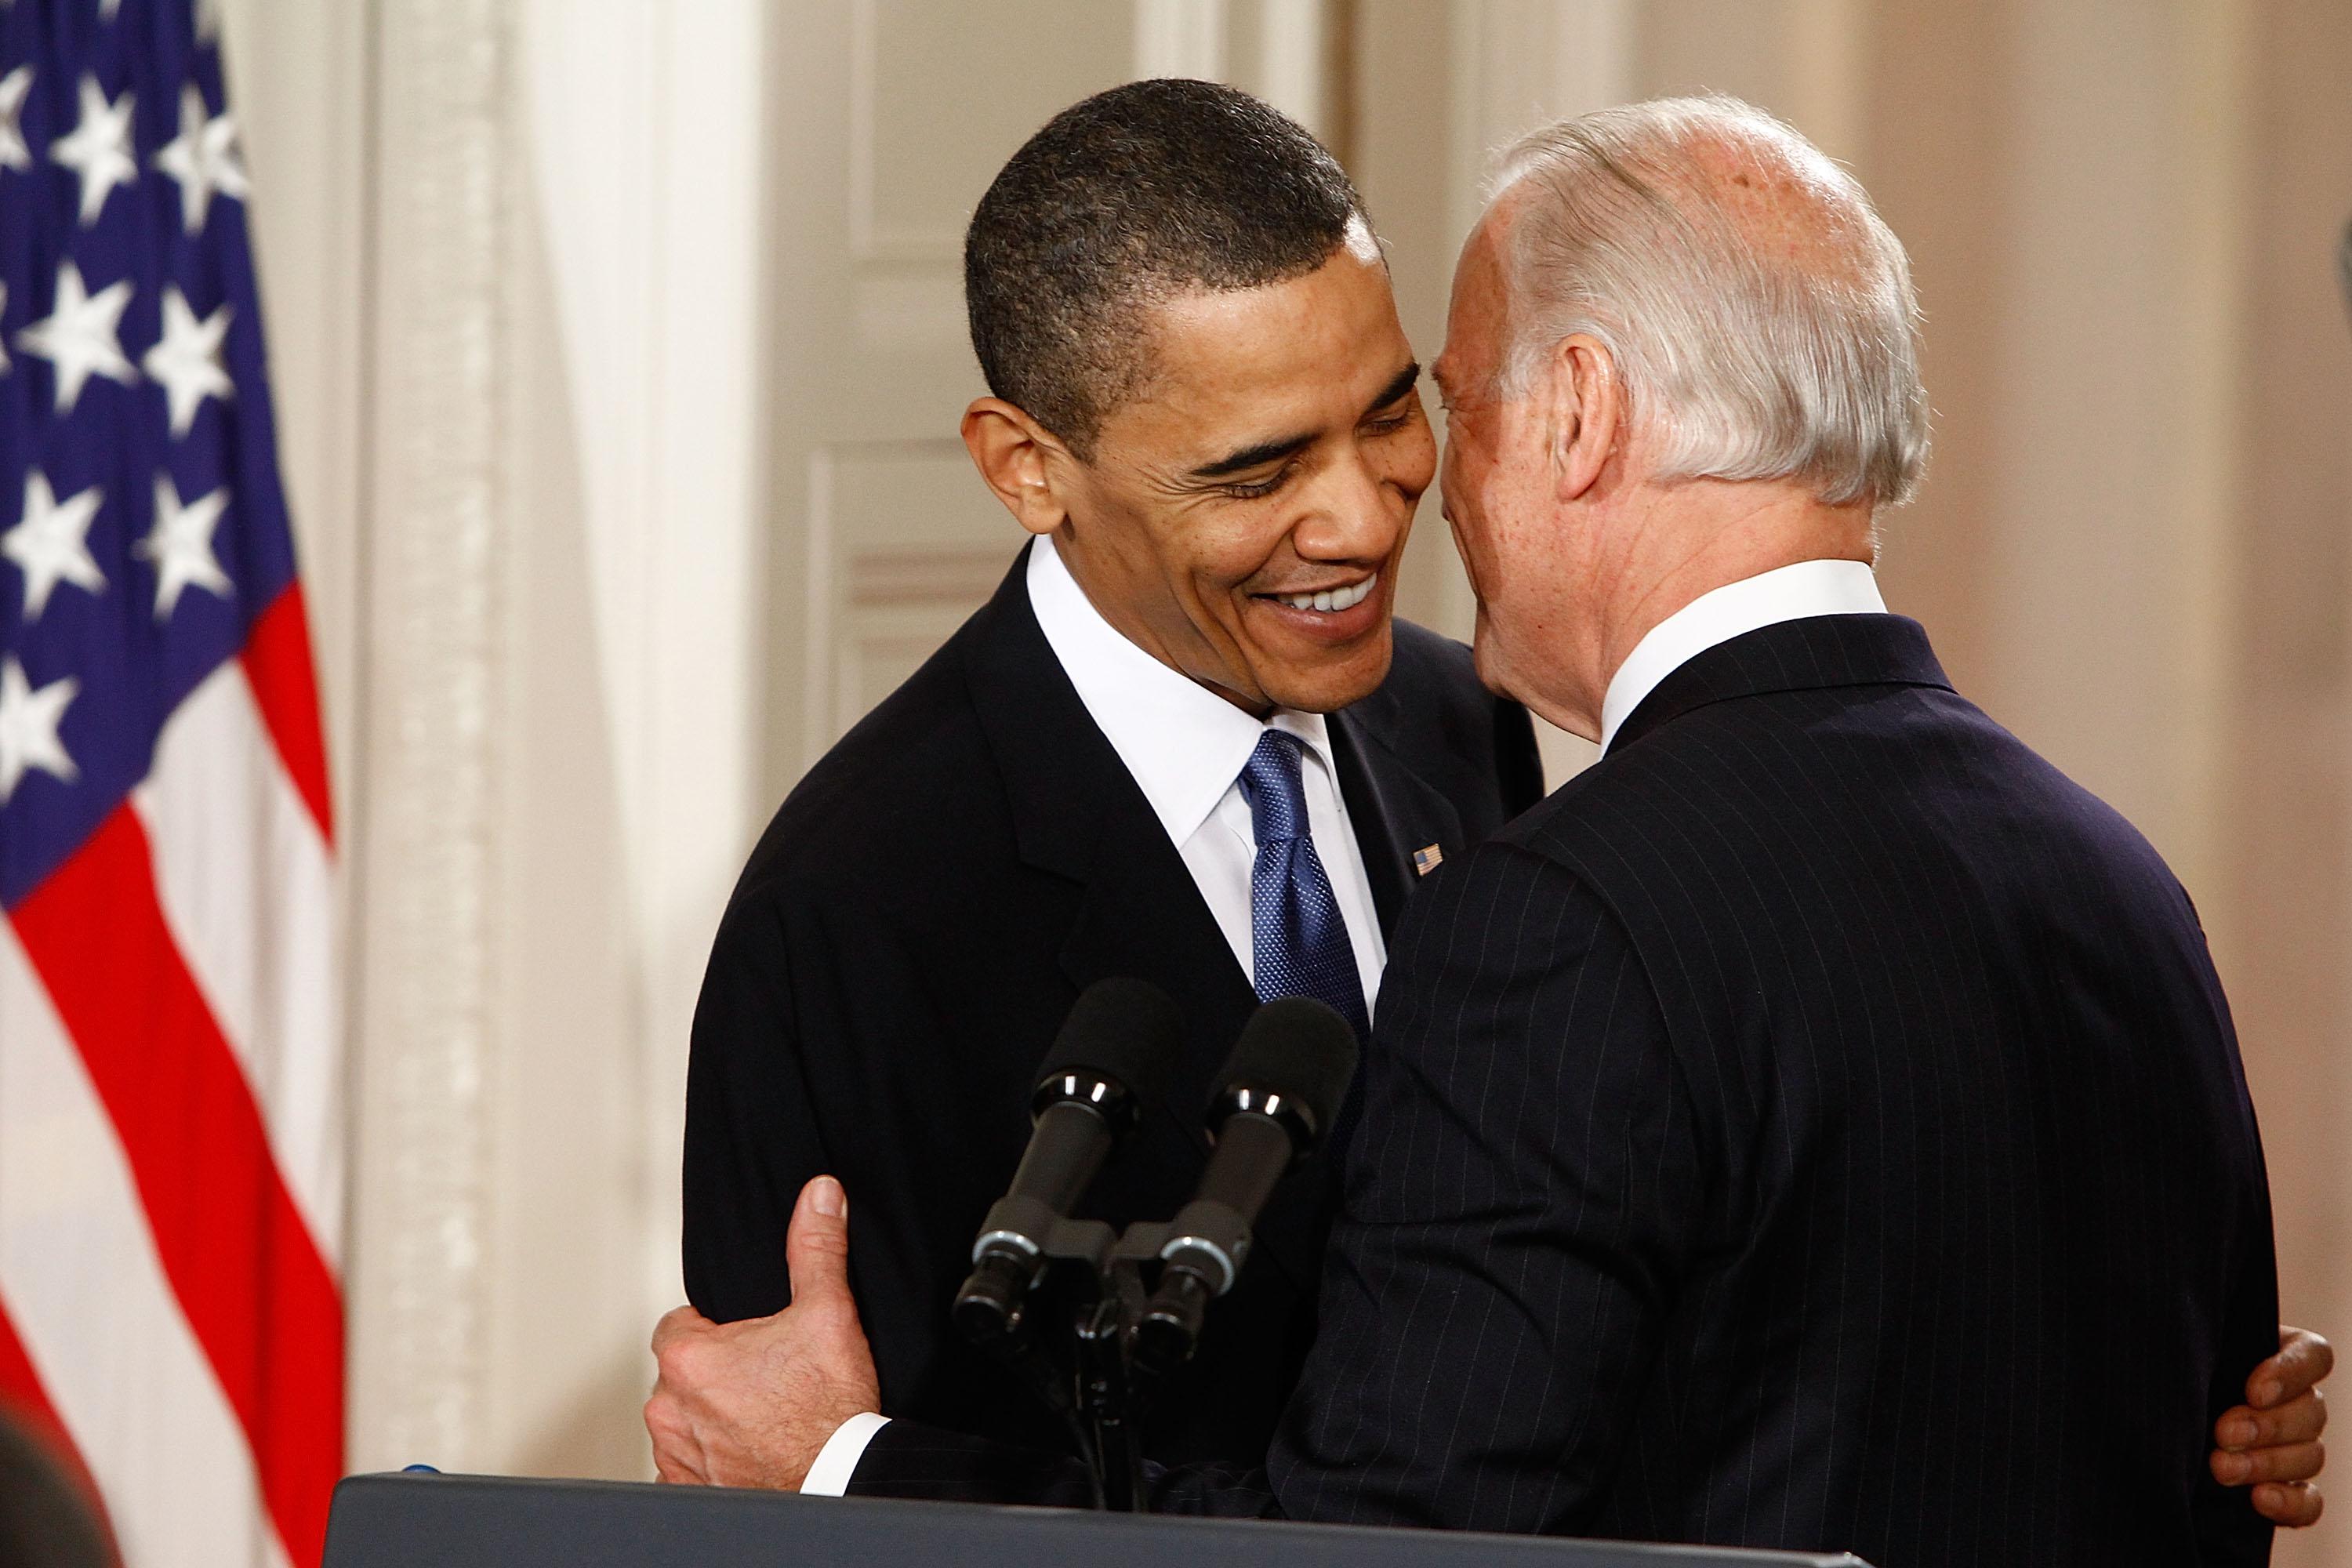 President Barack Obama is embraced by Vice President Joe Biden before signing the Affordable Health Care for America Act during a ceremony in the East Room of the White House March 23, 2010 in Washington, D.C.